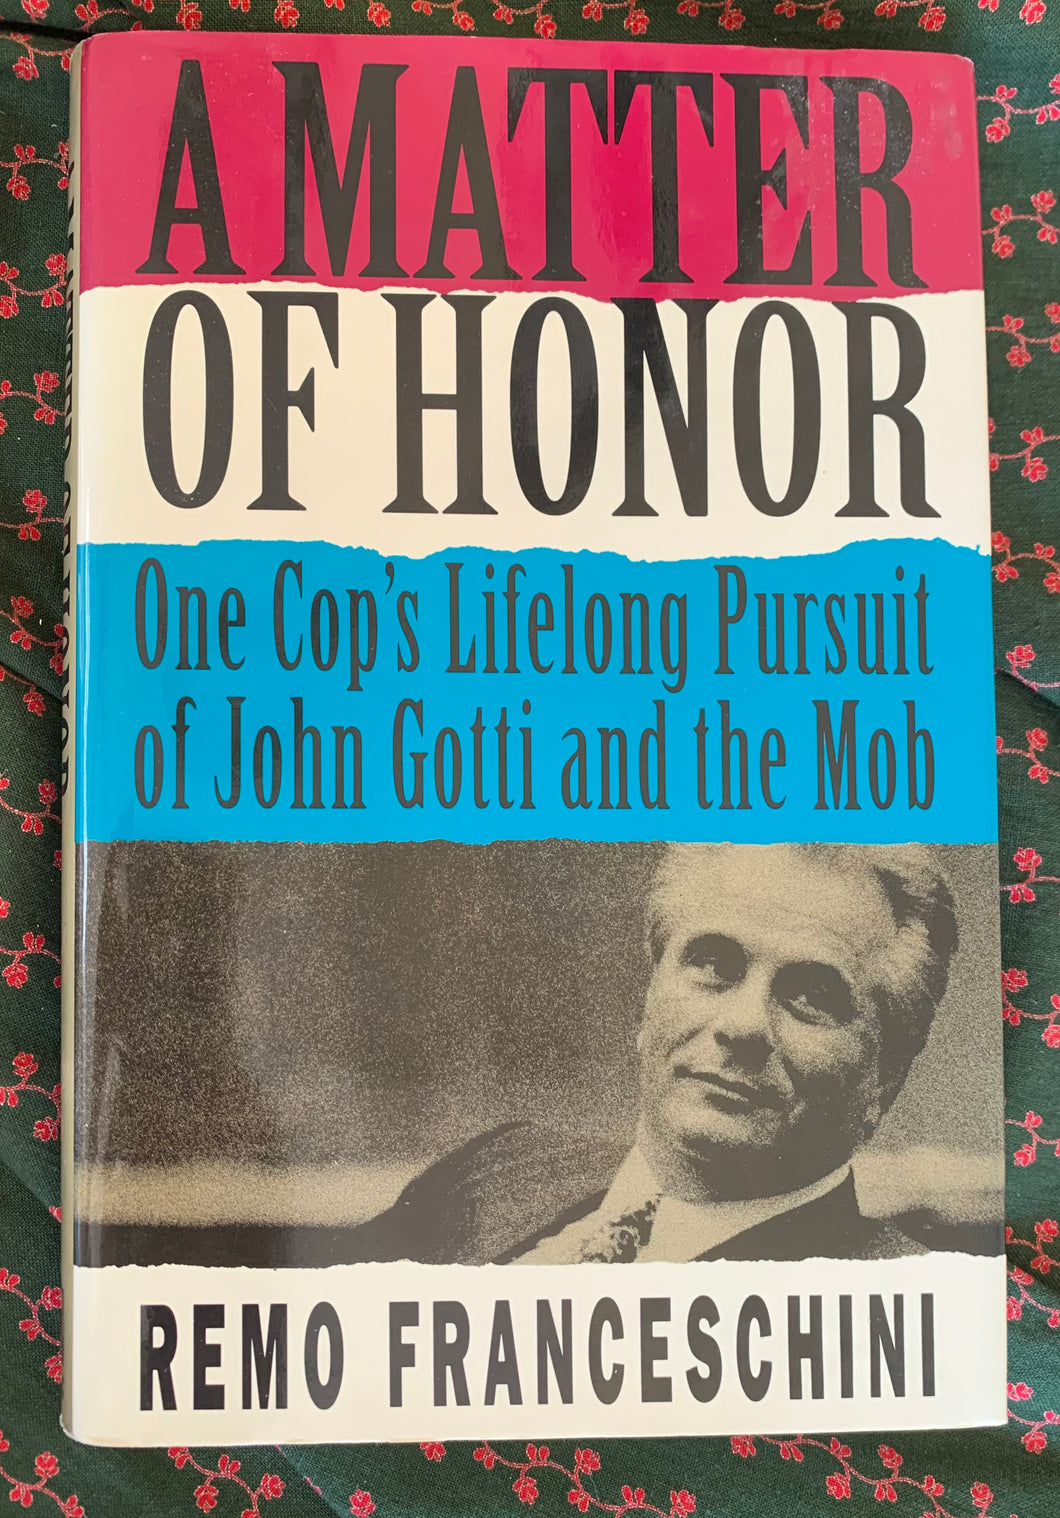 A Matter of Honor: One Cop's Lifelong Pursuit of John Gotti and the Mob